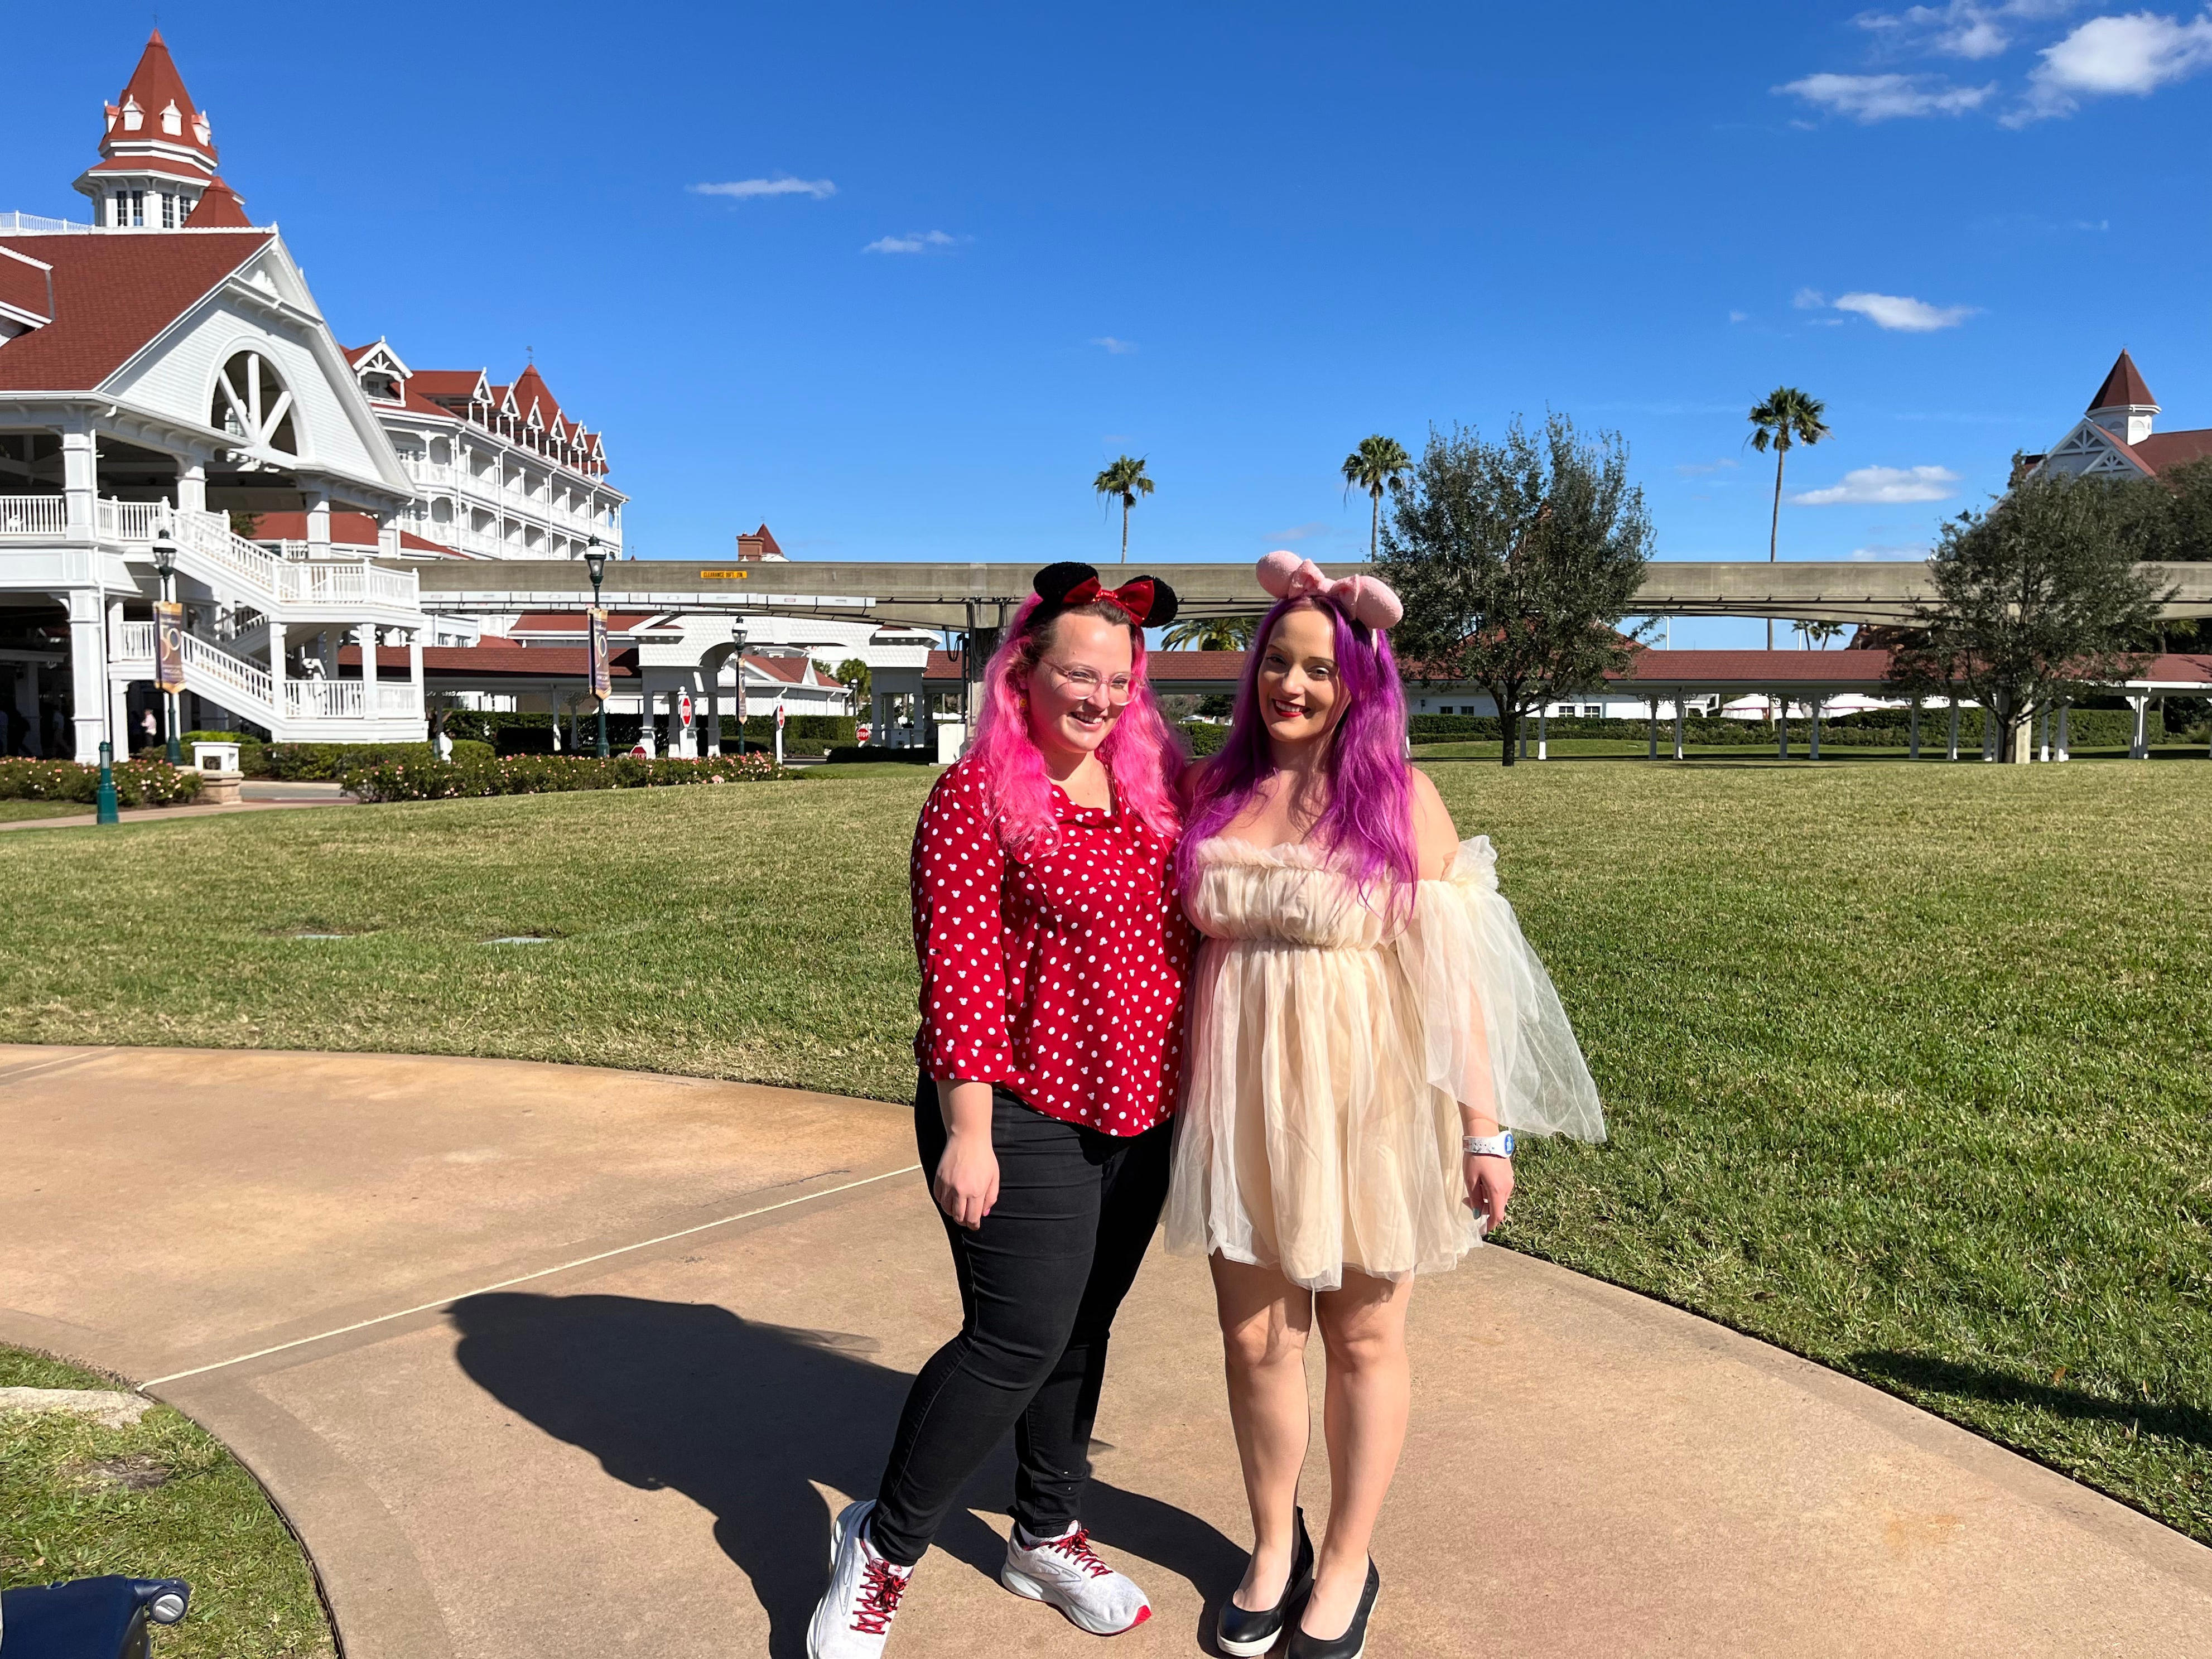 <p>It was a beautiful day and I wanted to snap some photos outside of the resort before heading inside. </p><p>A kind employee driving by in a club car offered to take our photos when he noticed me and my sister posing for a couple of selfies.</p><p>We took him up on his offer and grabbed a photo together.</p>